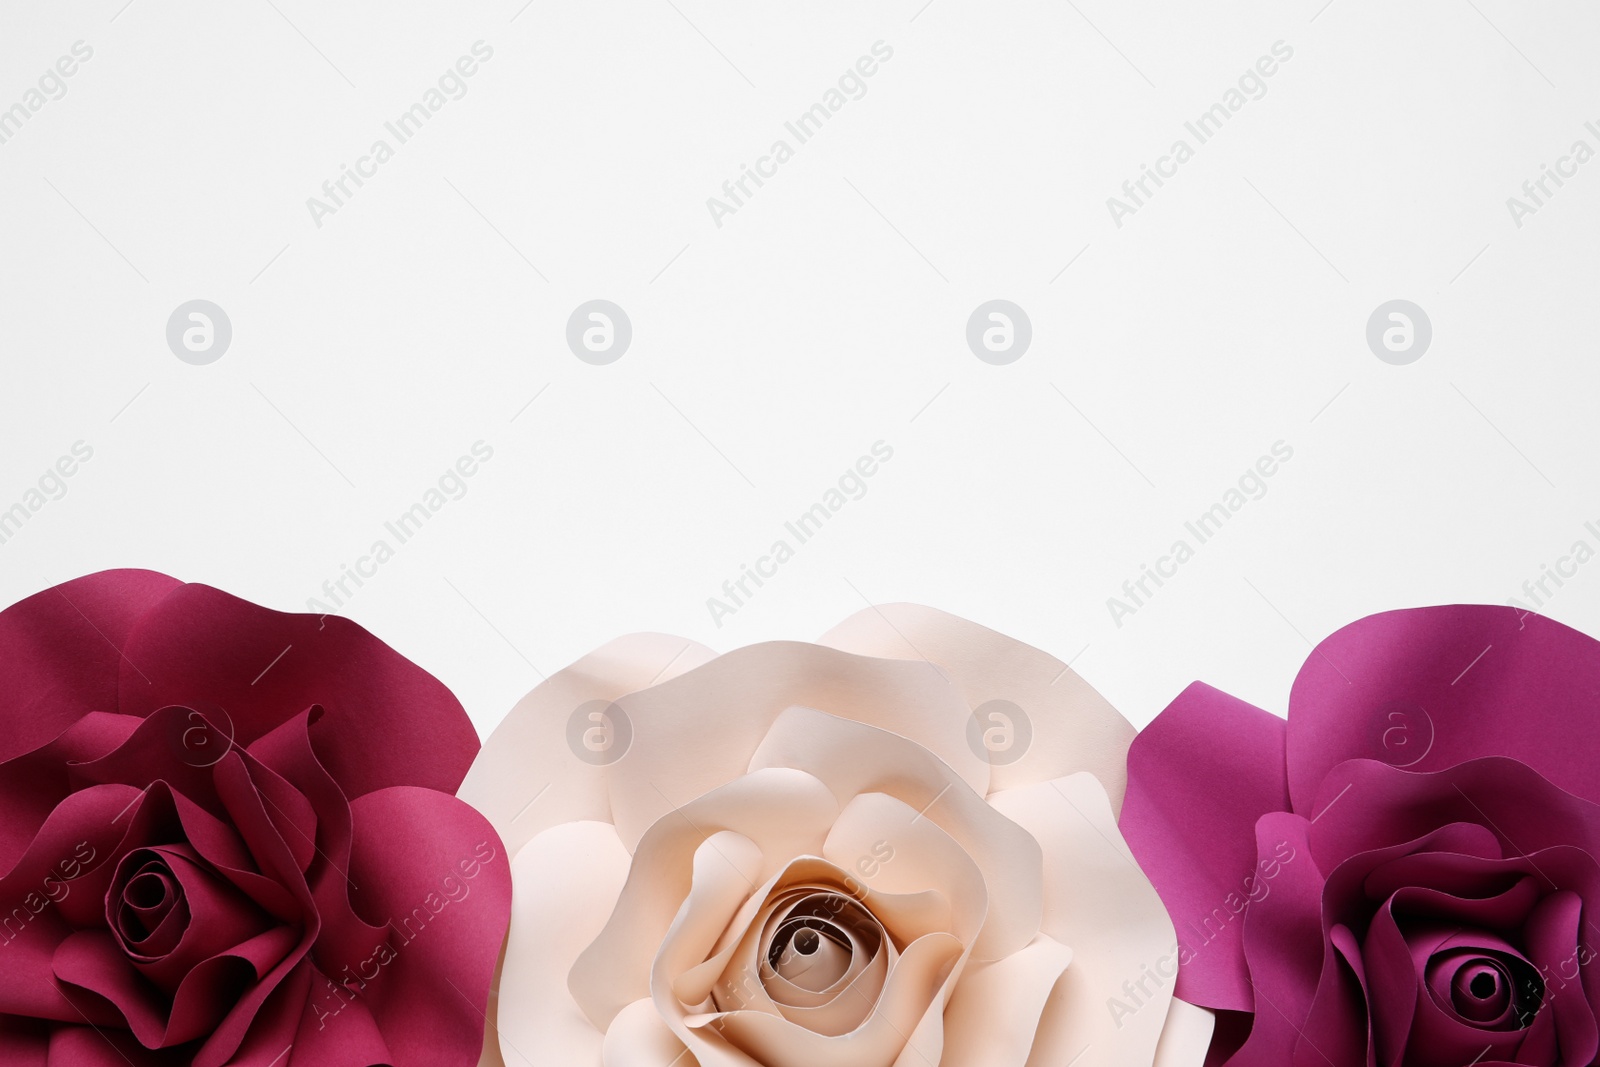 Photo of Different beautiful flowers made of paper on white background, top view